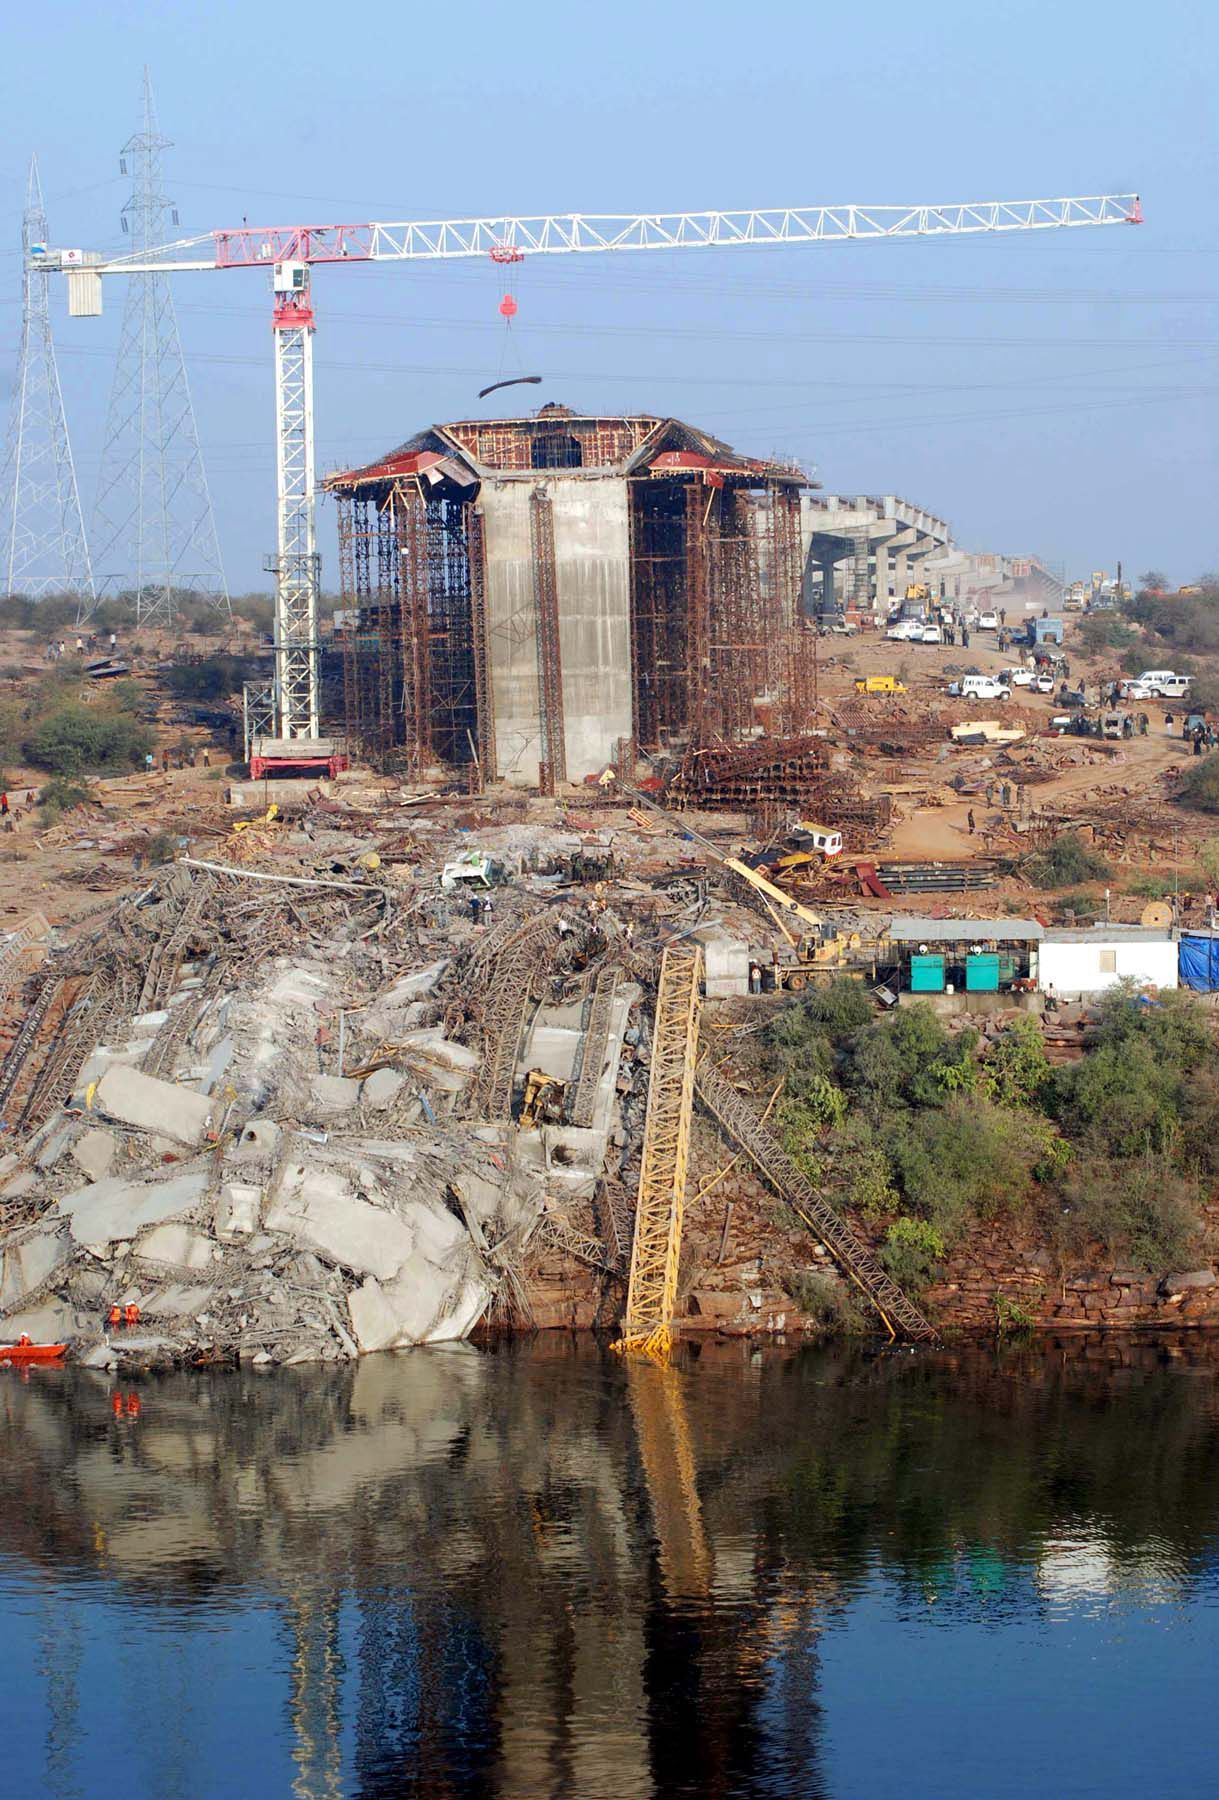 14_FotoUnder-construction bridge collapsed in the Chambal river in India. Dec. 24, 2009